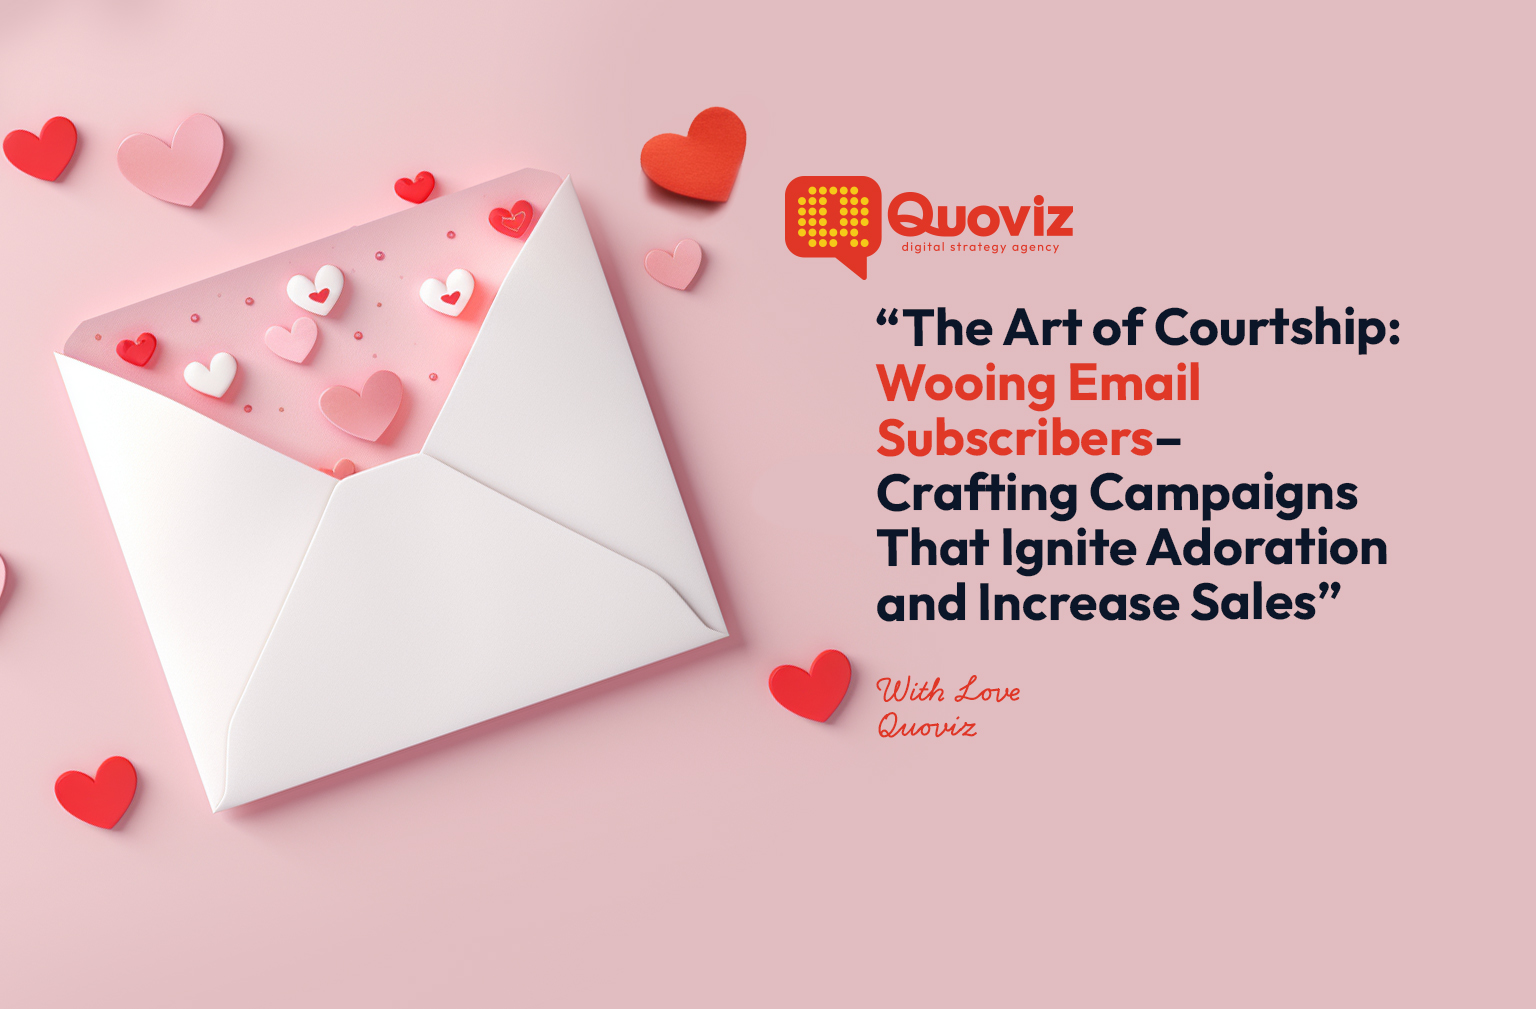 The Art of Courtship: Wooing Email Subscribers - Crafting Campaigns That Ignite Adoration and Increase sales